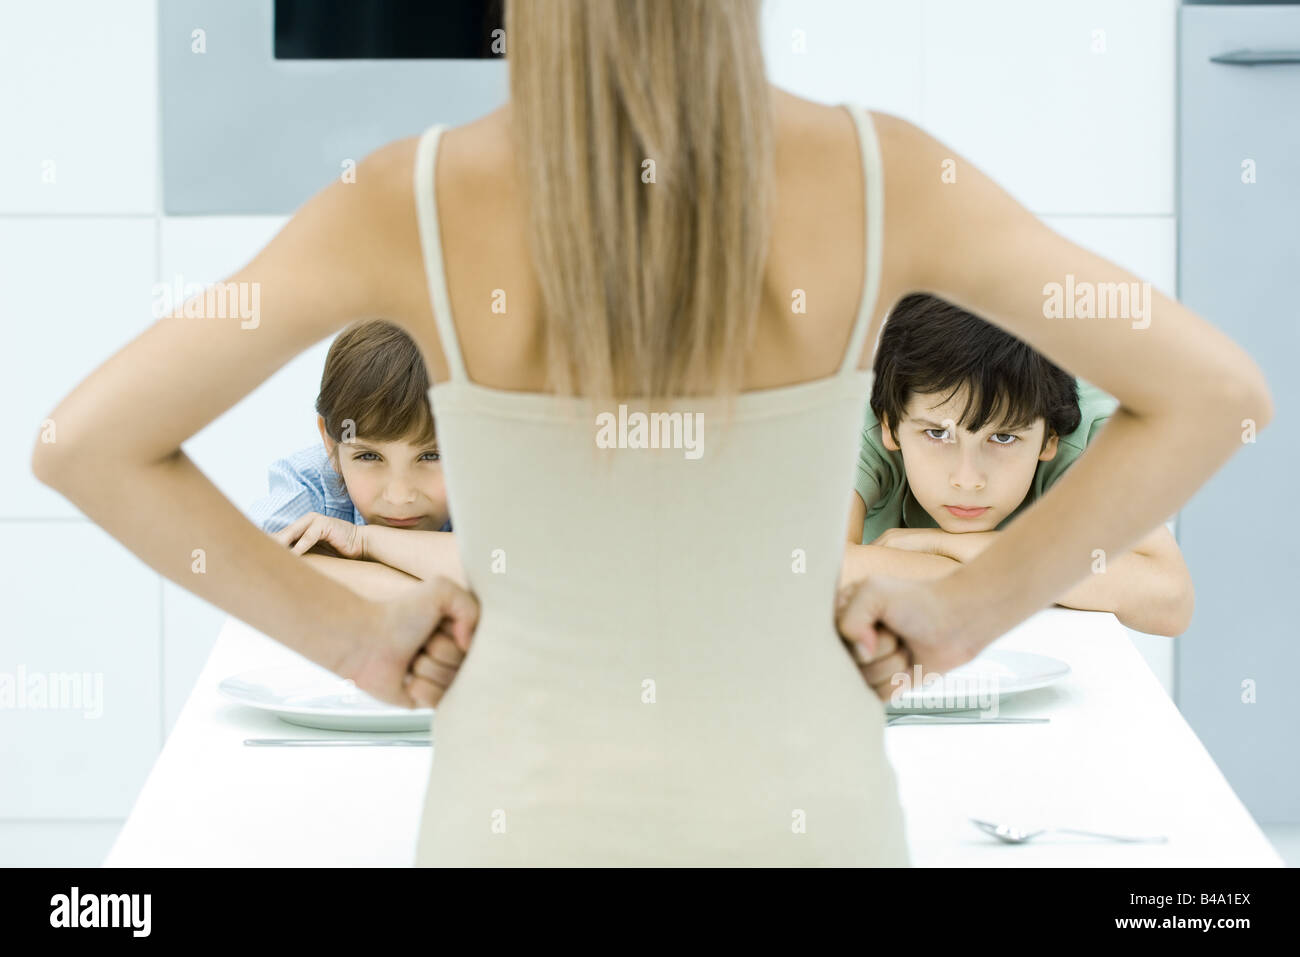 Mother standing with hands on hips in front of two sulking boys, cropped view Stock Photo